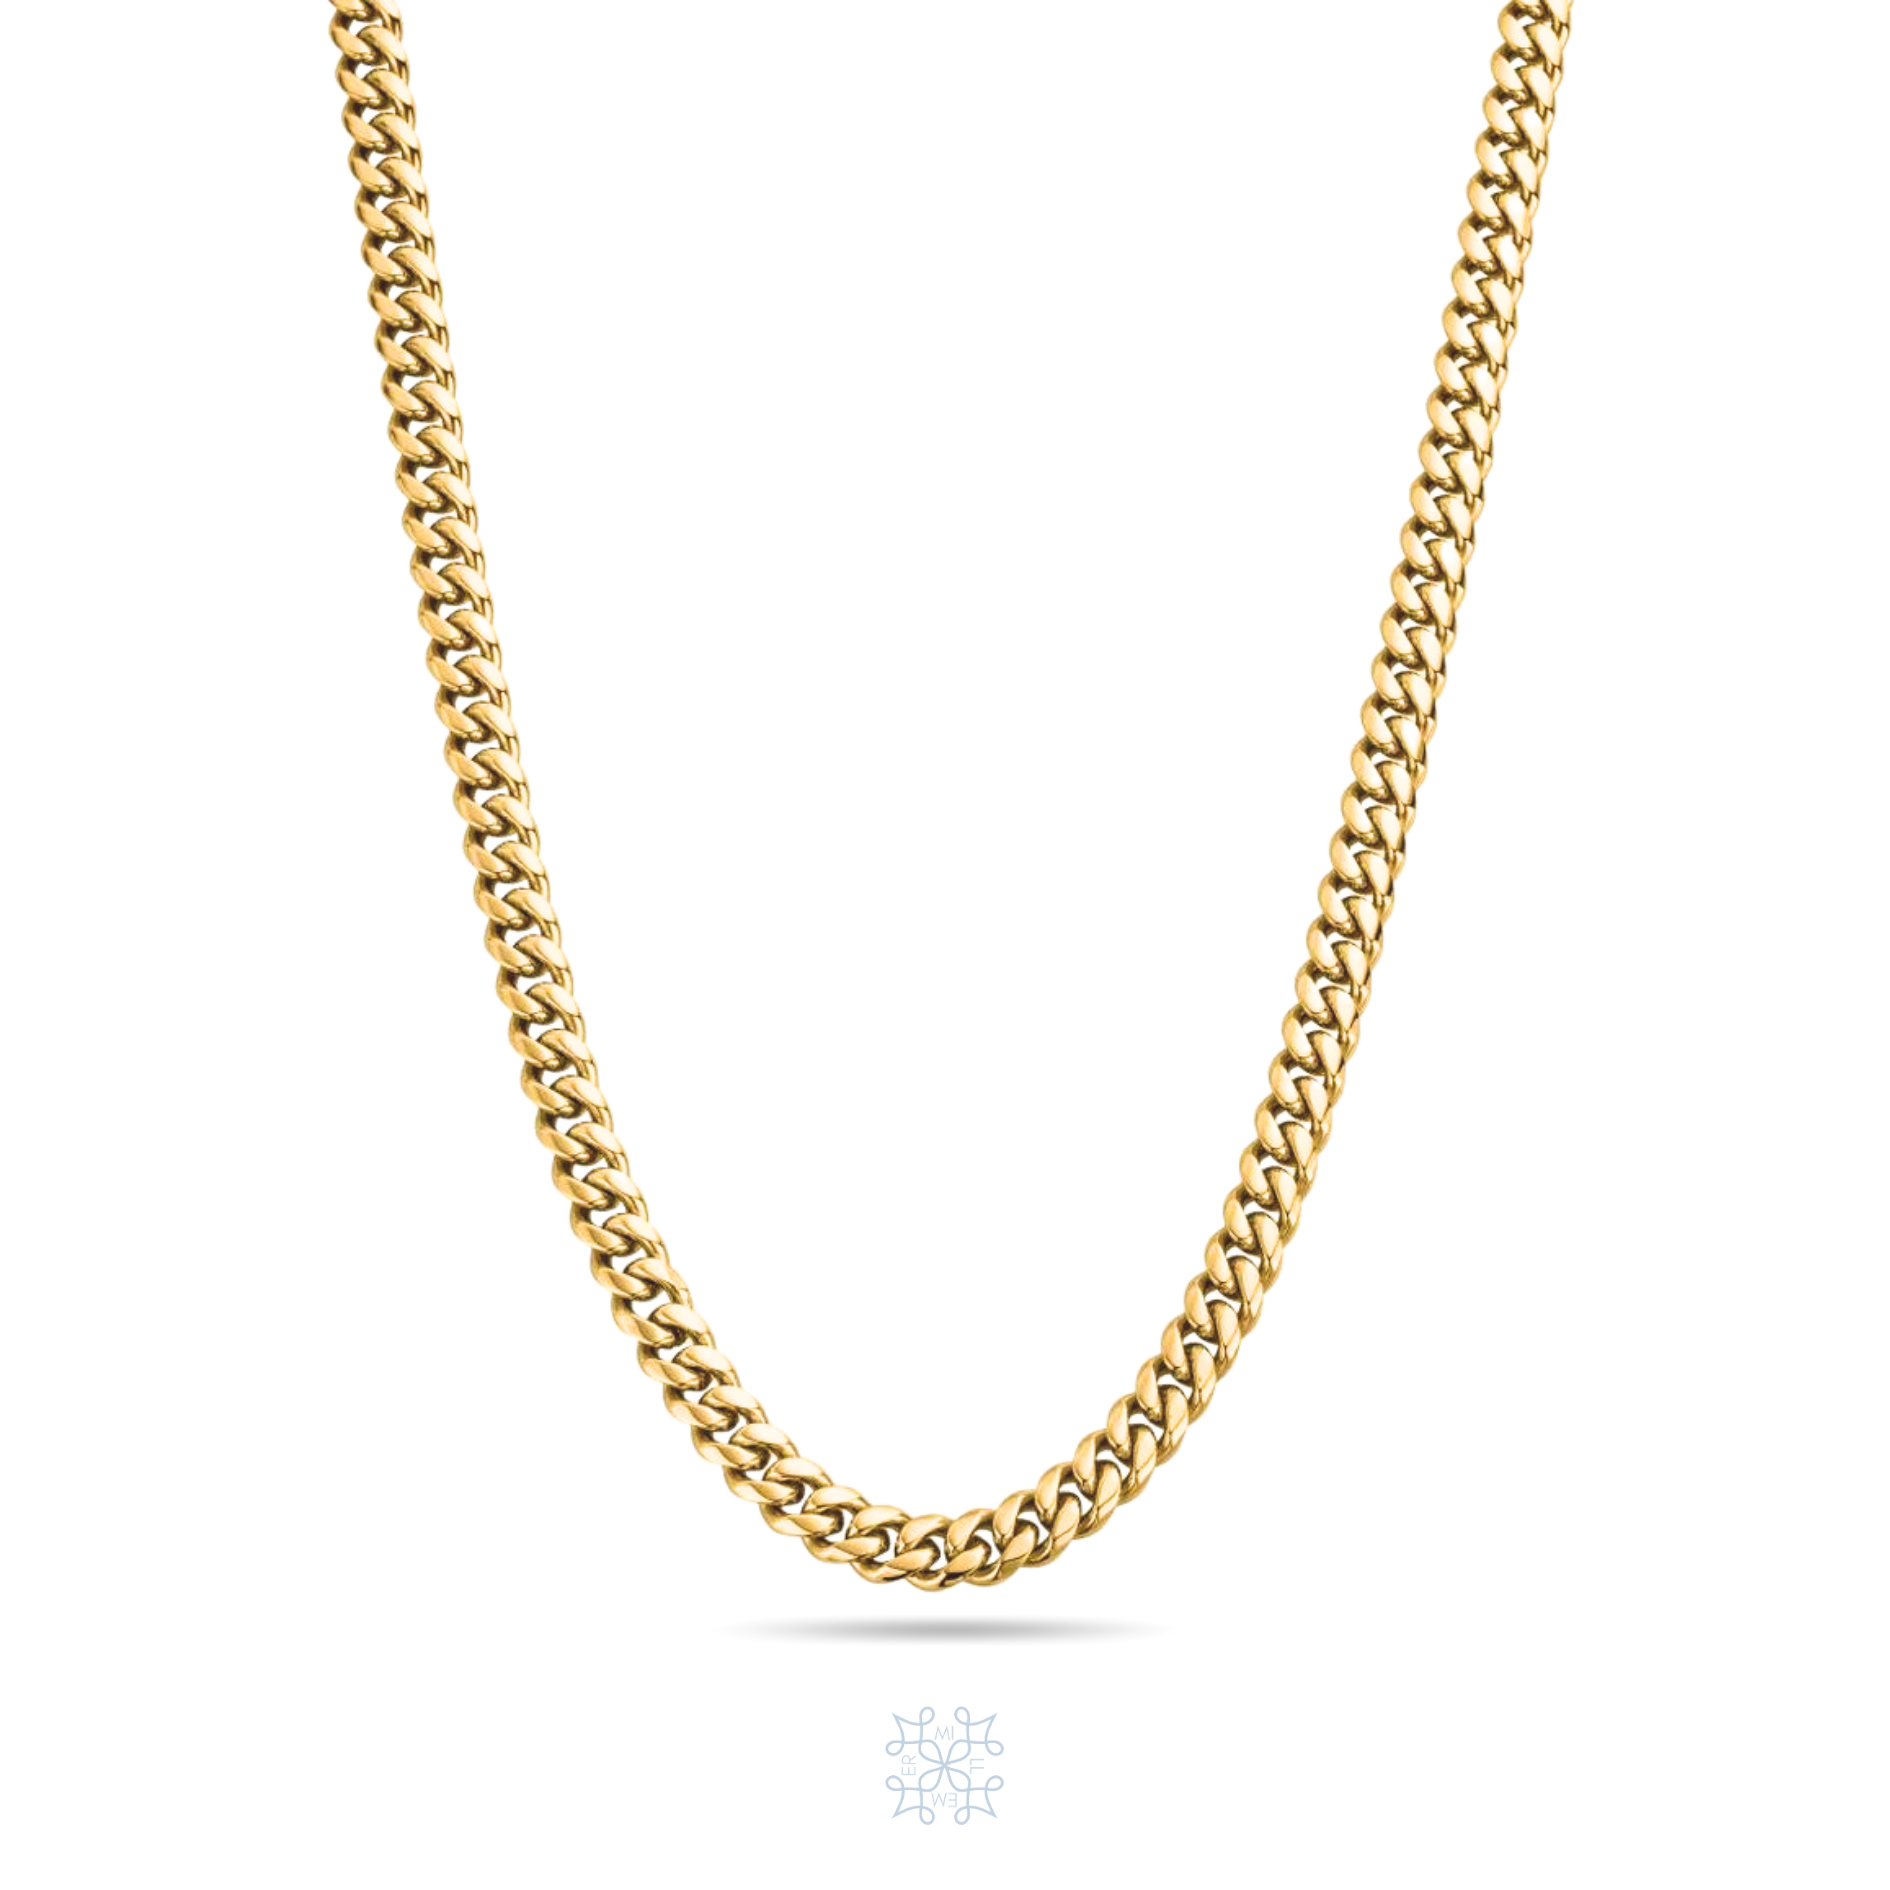 CUBAN chain Necklace. Seven milimeters of chain width. Gold cuban chain. CUBAN B Chain Necklace